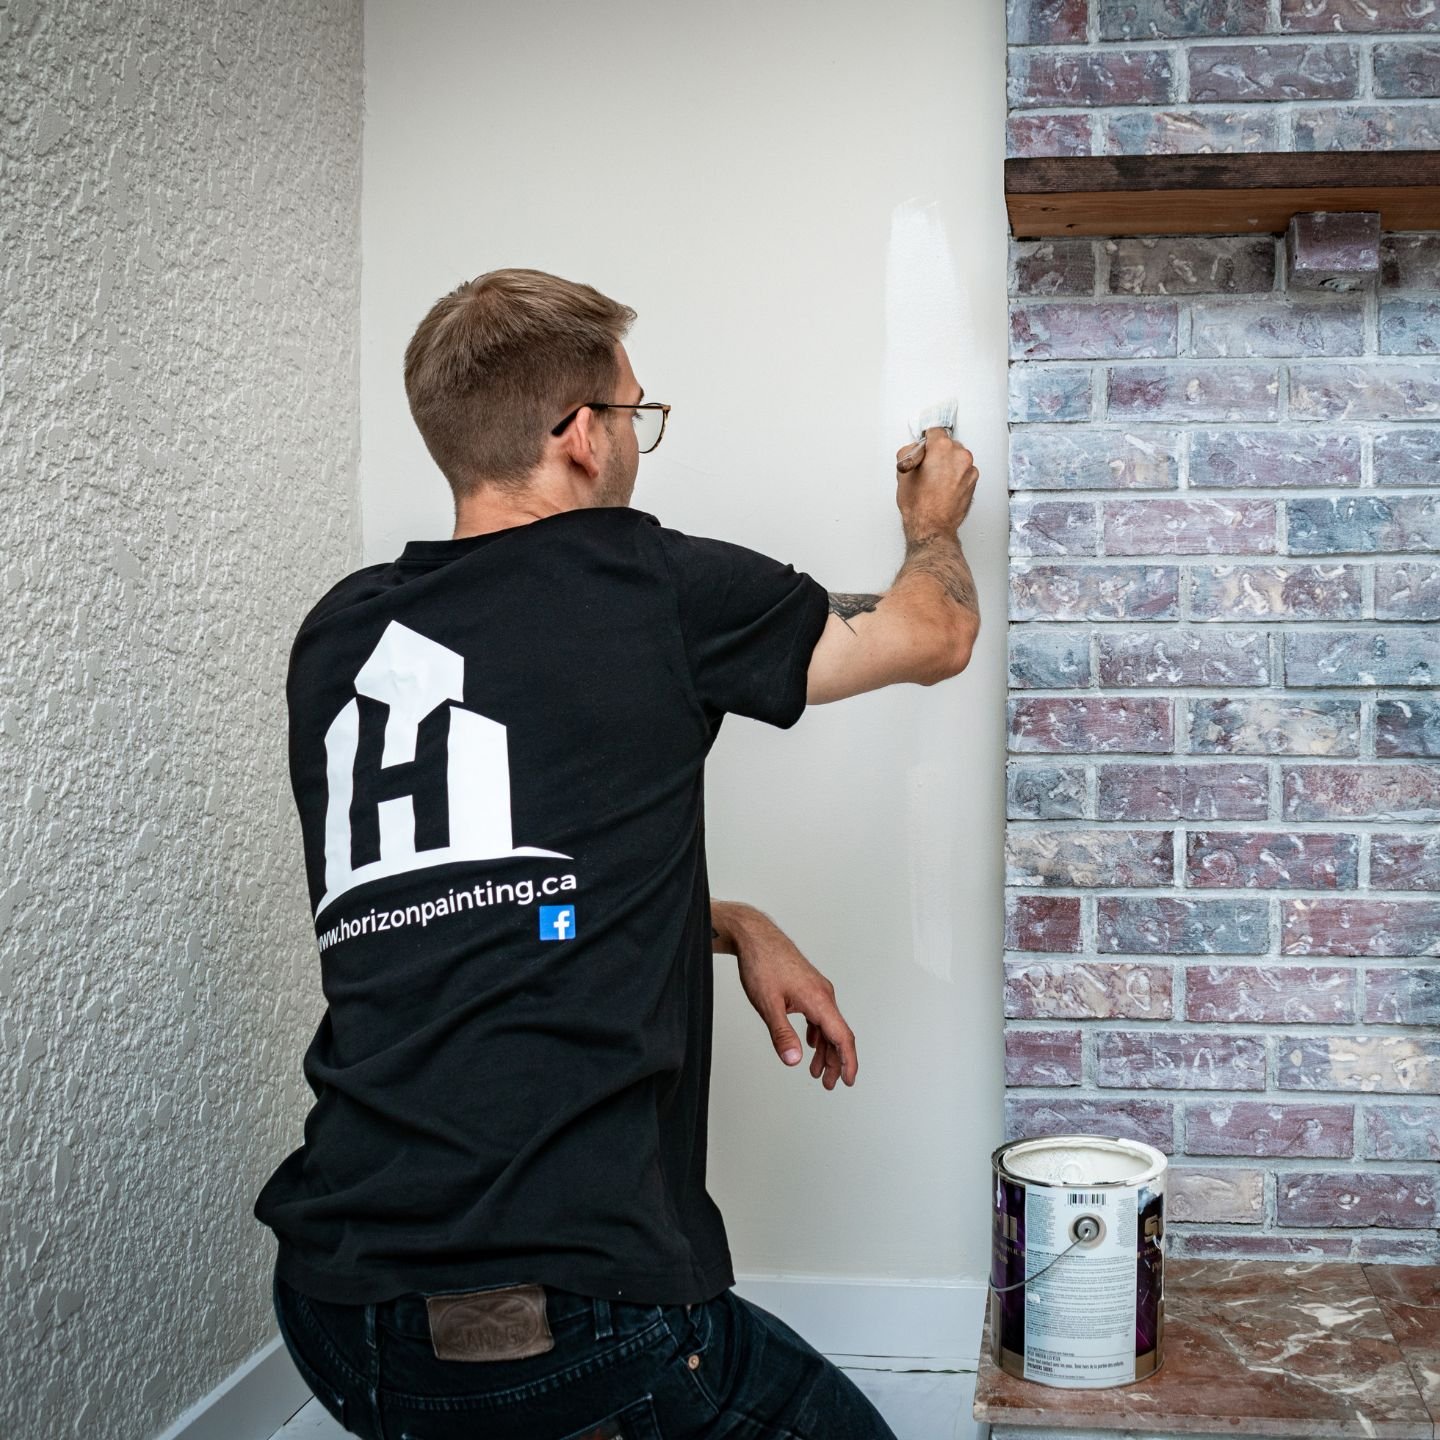 Painting the wall edge